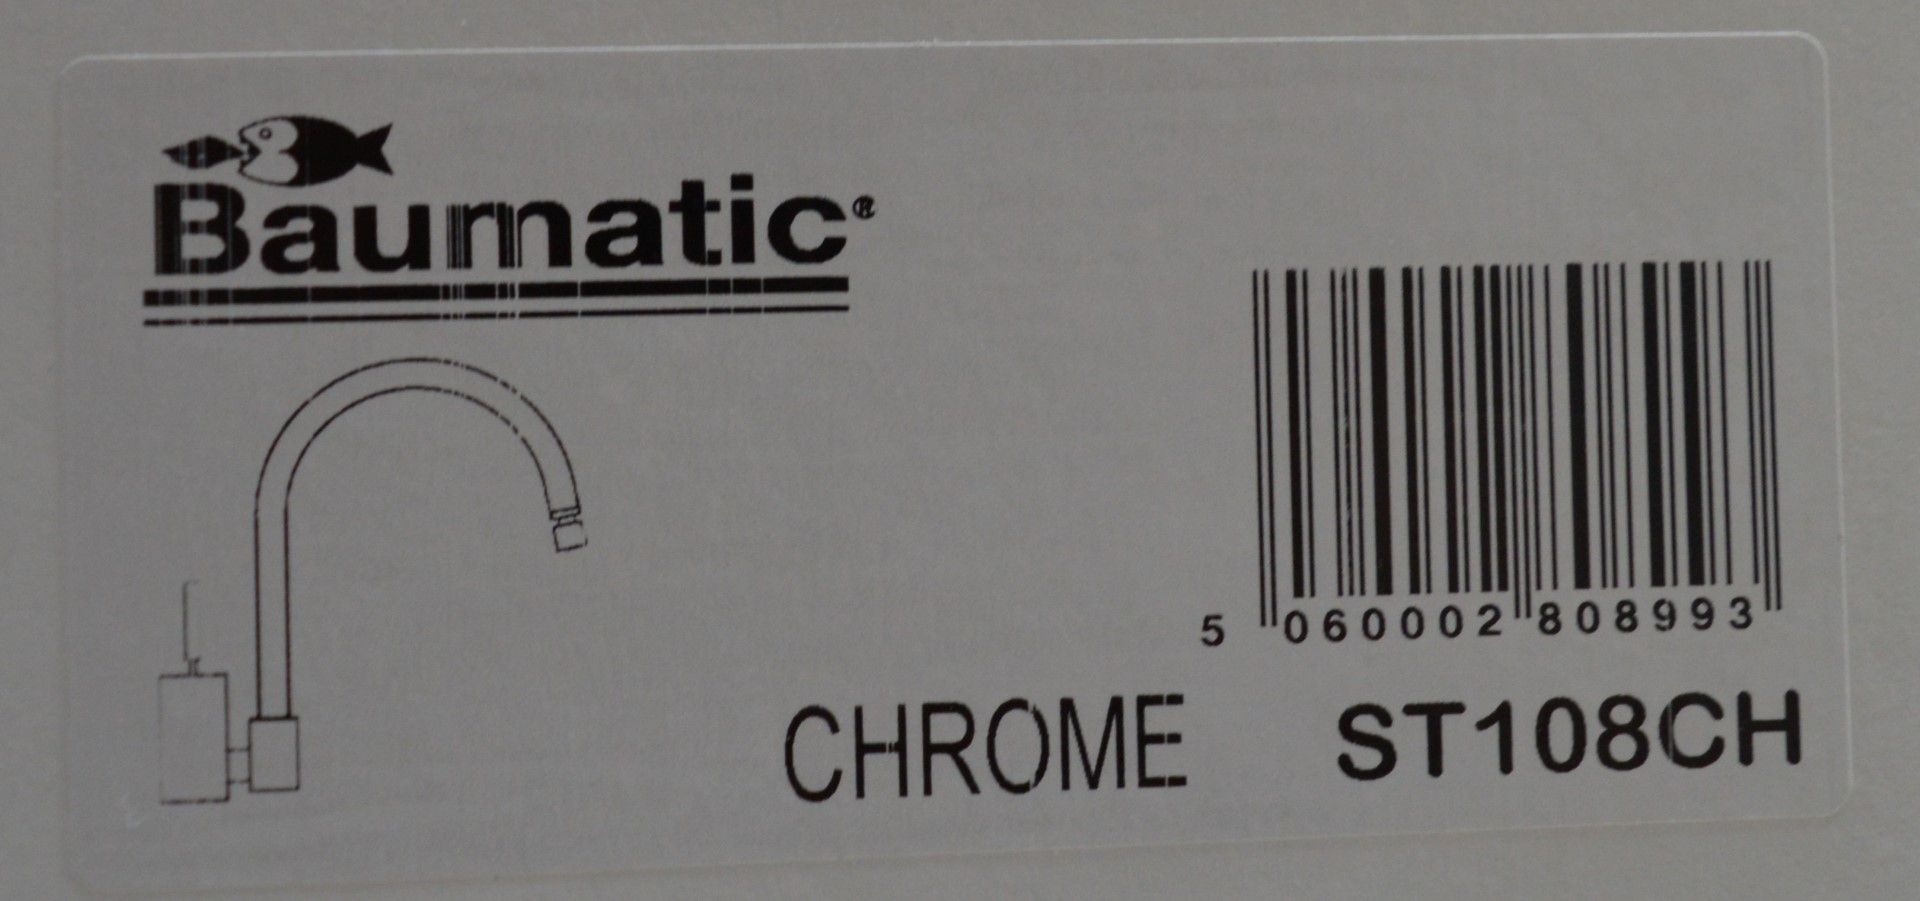 1 x Baumatic ST108CH Avalon Mixer Tap in Chrome – NEW & BOXED – CL053 – Location: Altrincham - Image 3 of 6